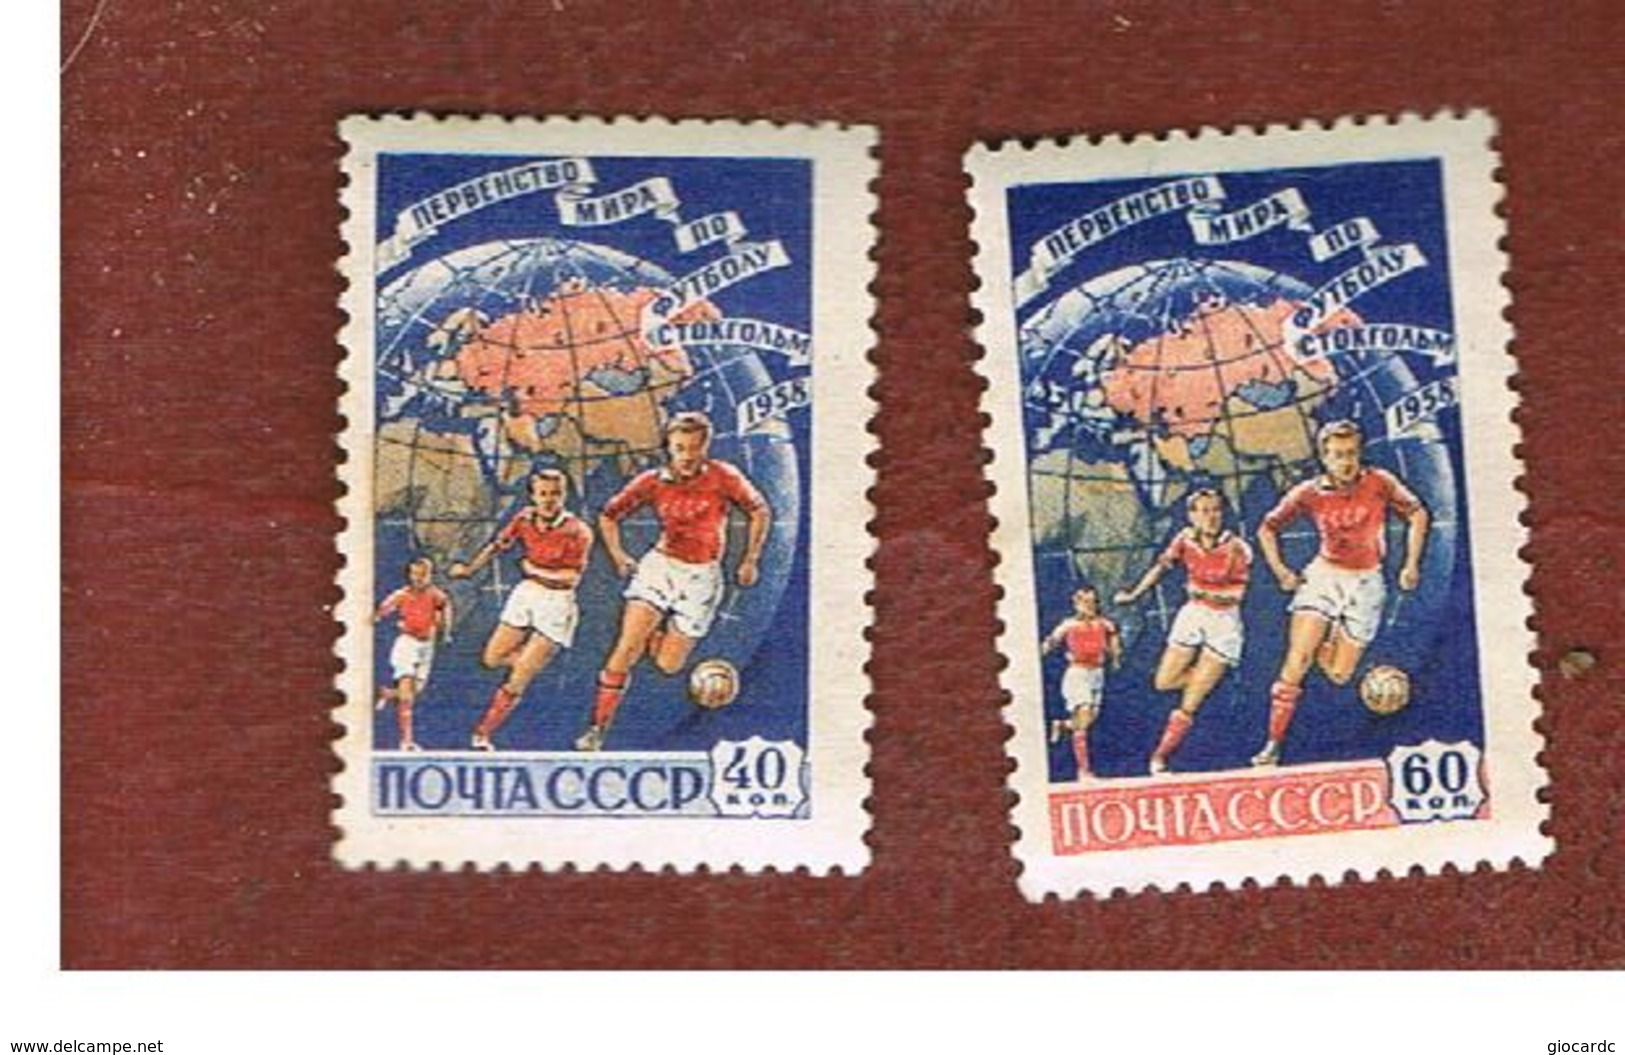 URSS -  SG  2210.2211   -  1958  WORLD CUP FOOTBALL (COMPLET SET OF 2)   -   UNUSED WITHOUT GUM - Unused Stamps